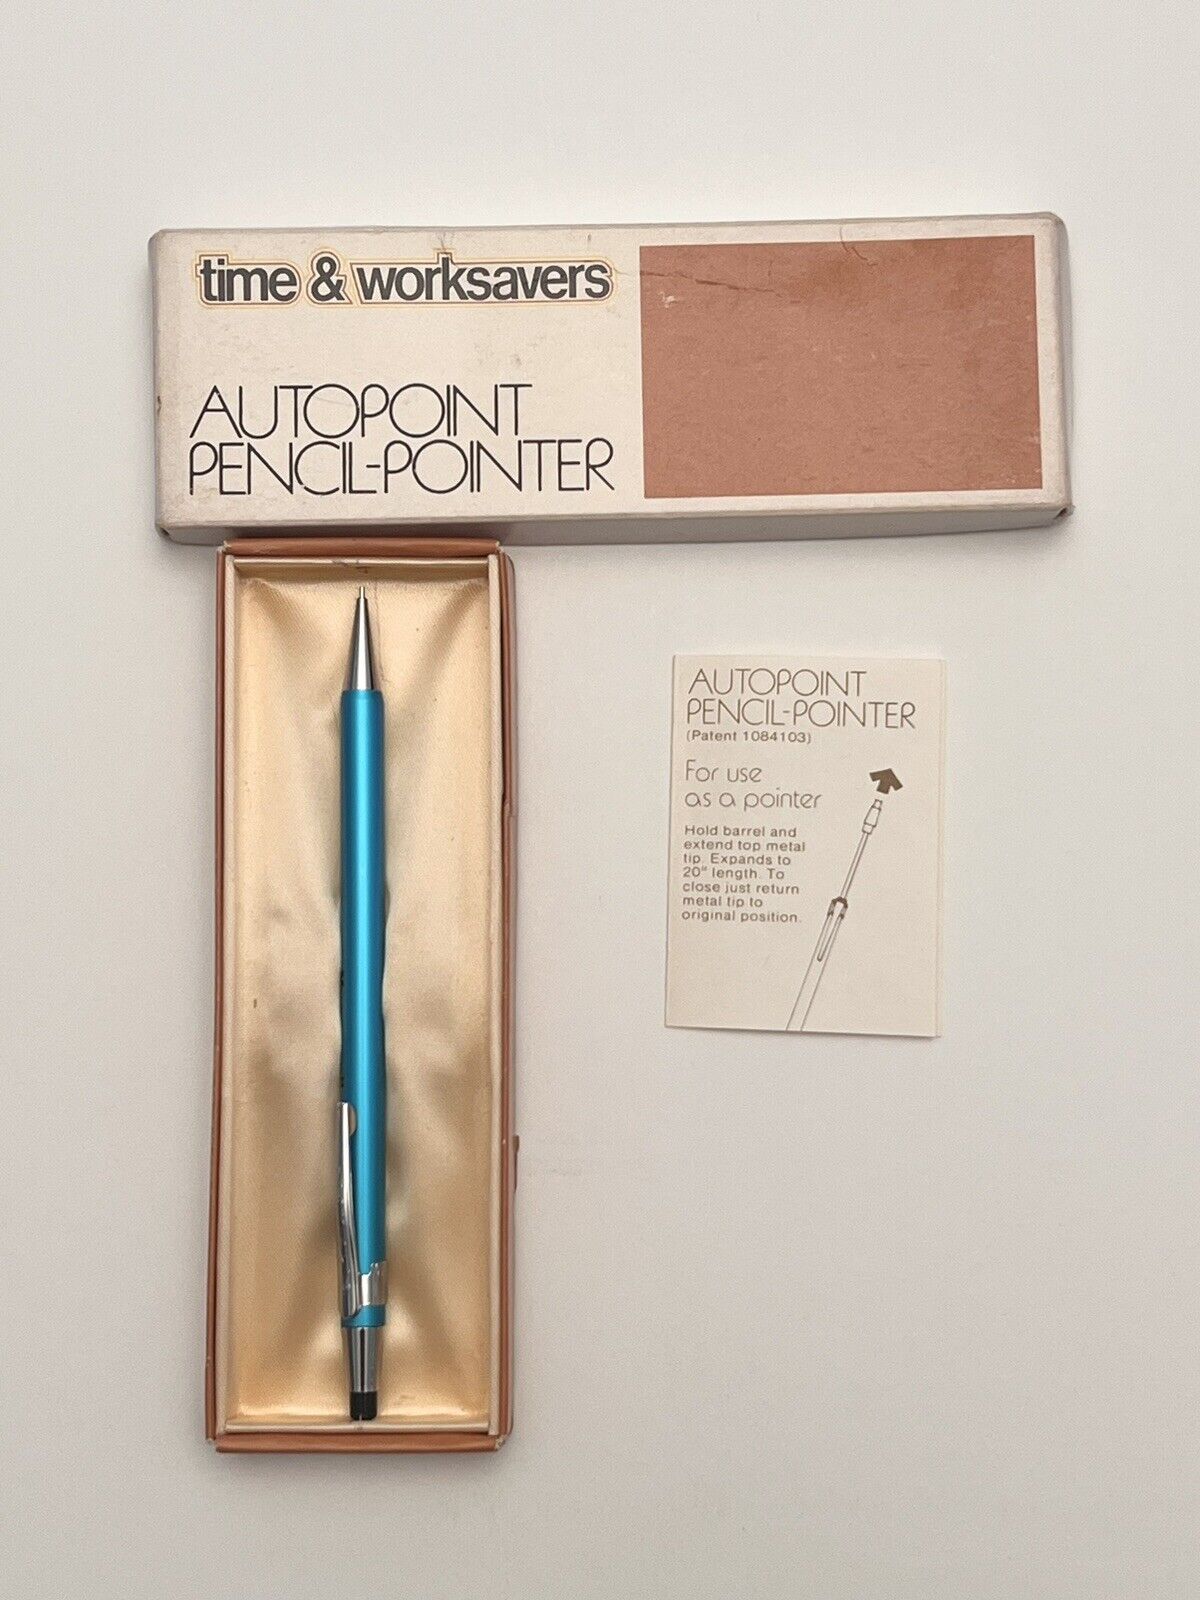 Vintage Honeywell Autopoint Pencil-Pointer Expands To 20”  With Box.